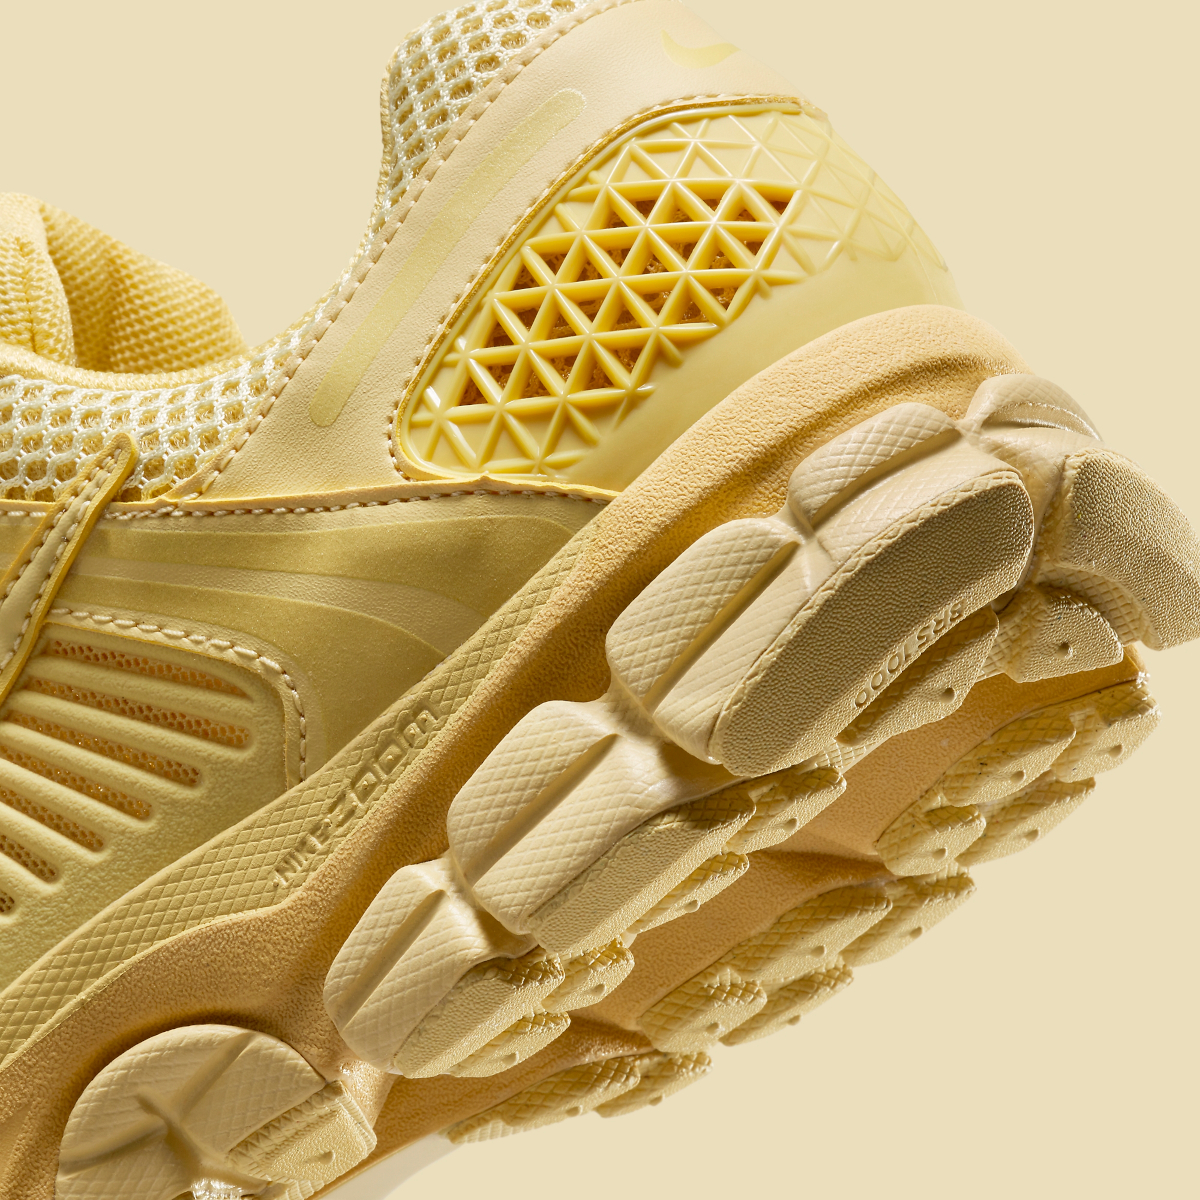 Nike For a closer look at this upcoming Air Max Plus Saturn Gold Fq7079 700 5